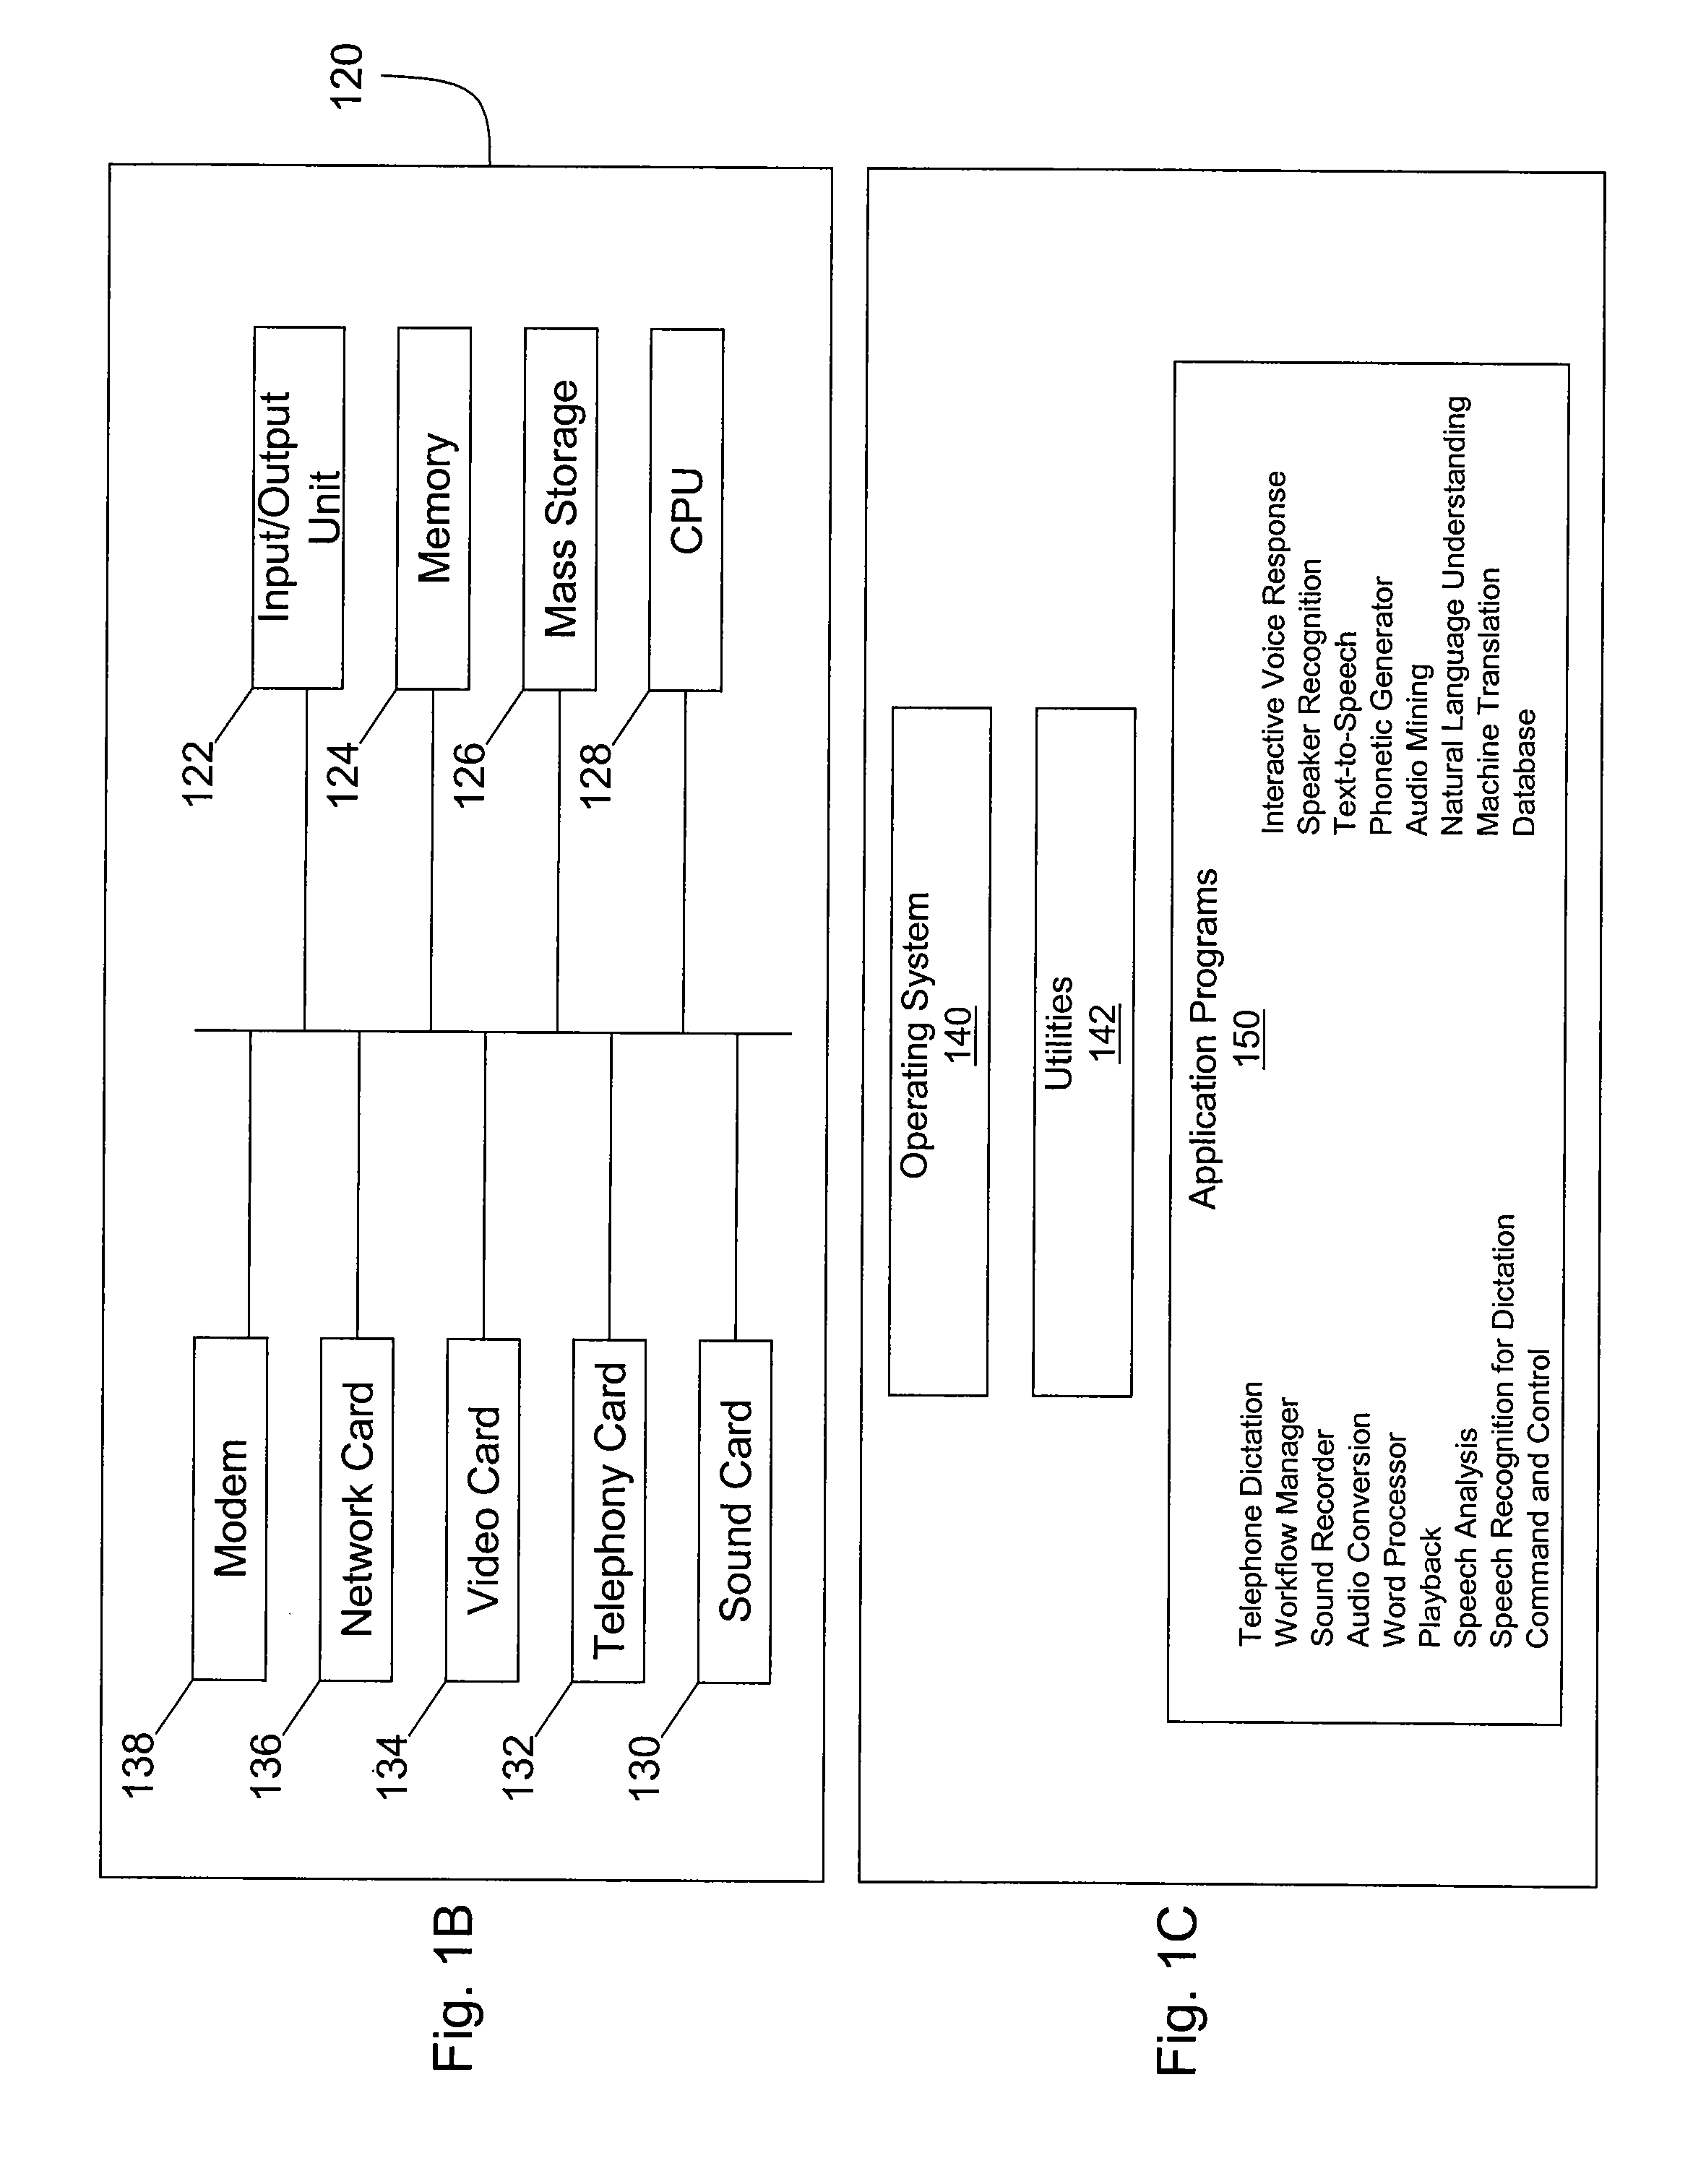 Session File Modification with Annotation Using Speech Recognition or Text to Speech